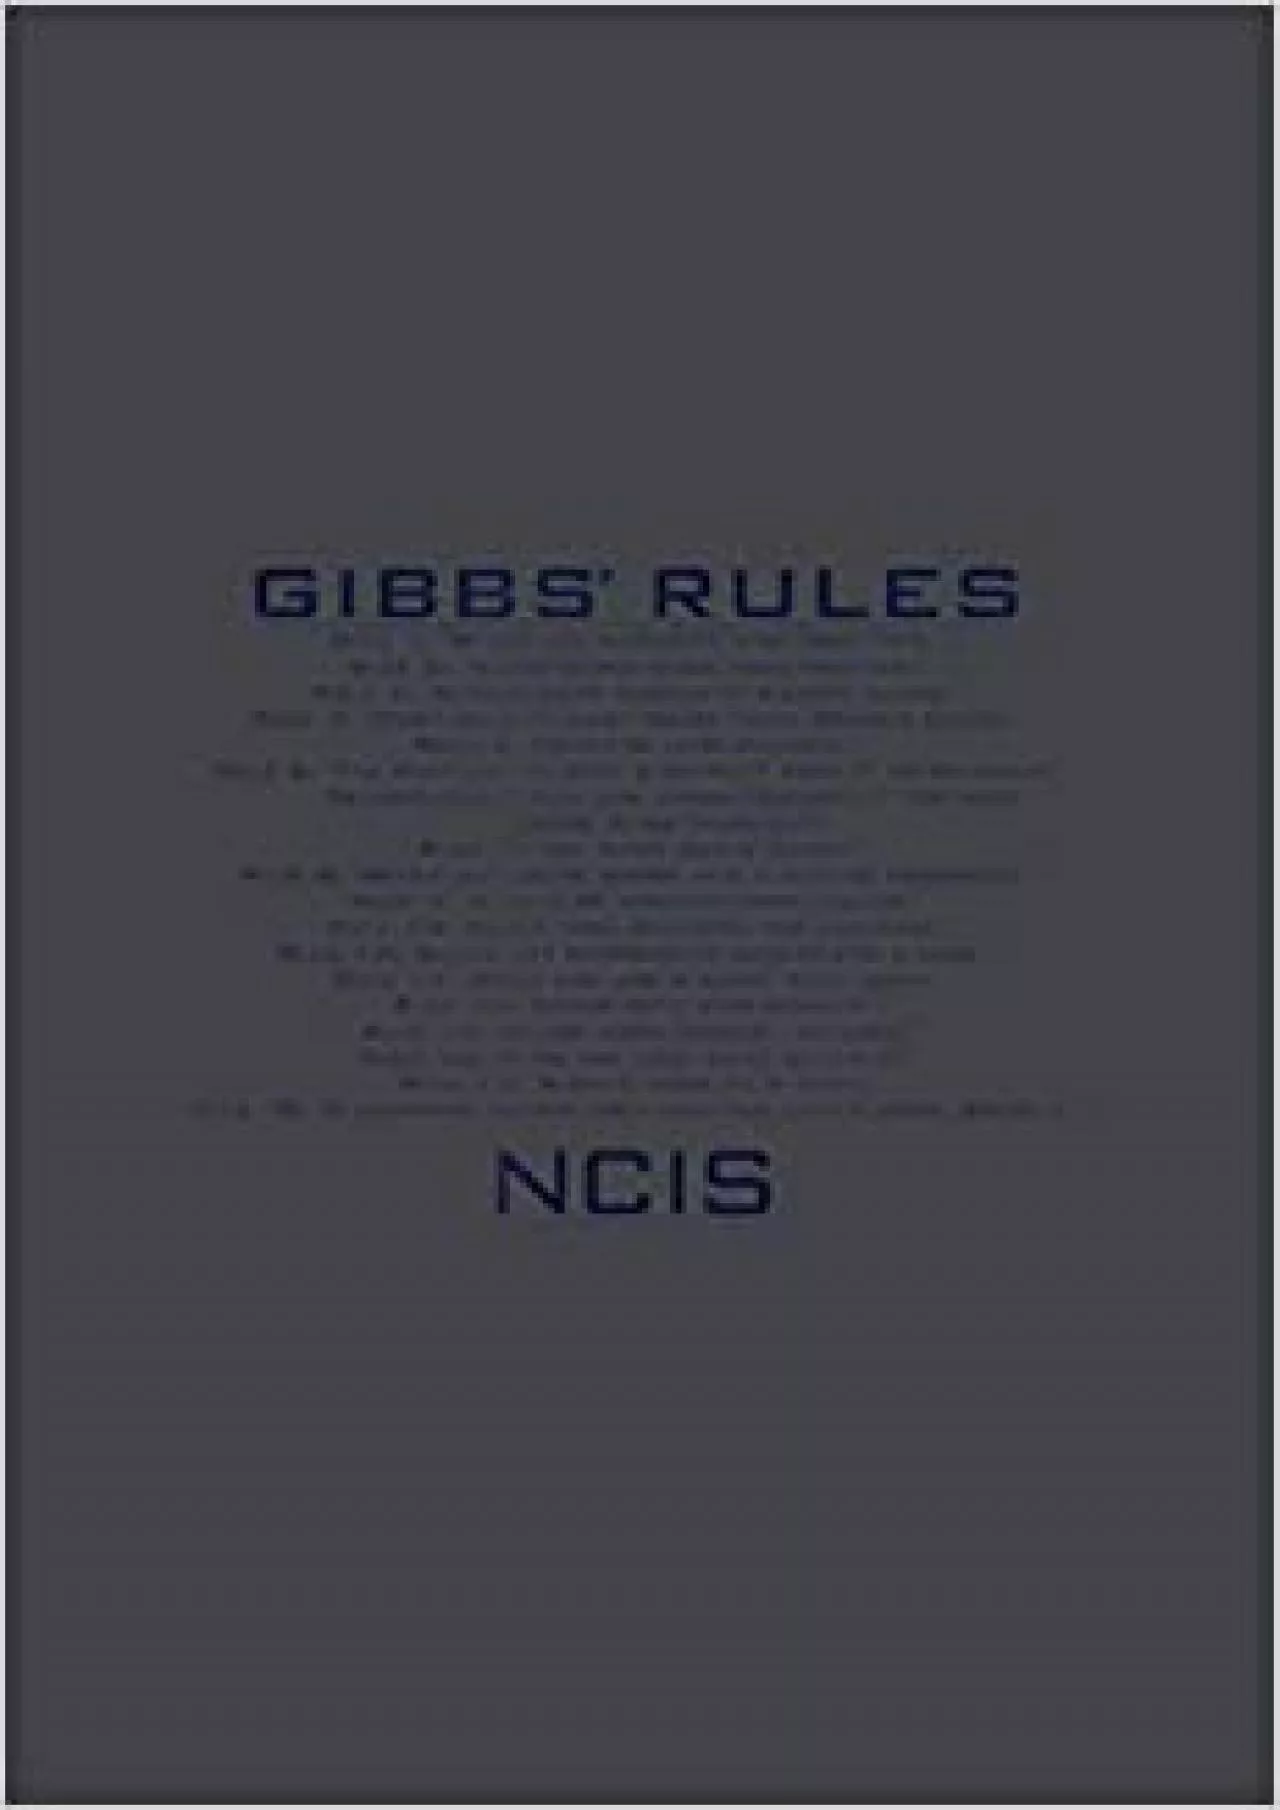 NCIS Gibbs Rules: Notebook Planner -6x9 inch Daily Planner Journal To Do List Notebook